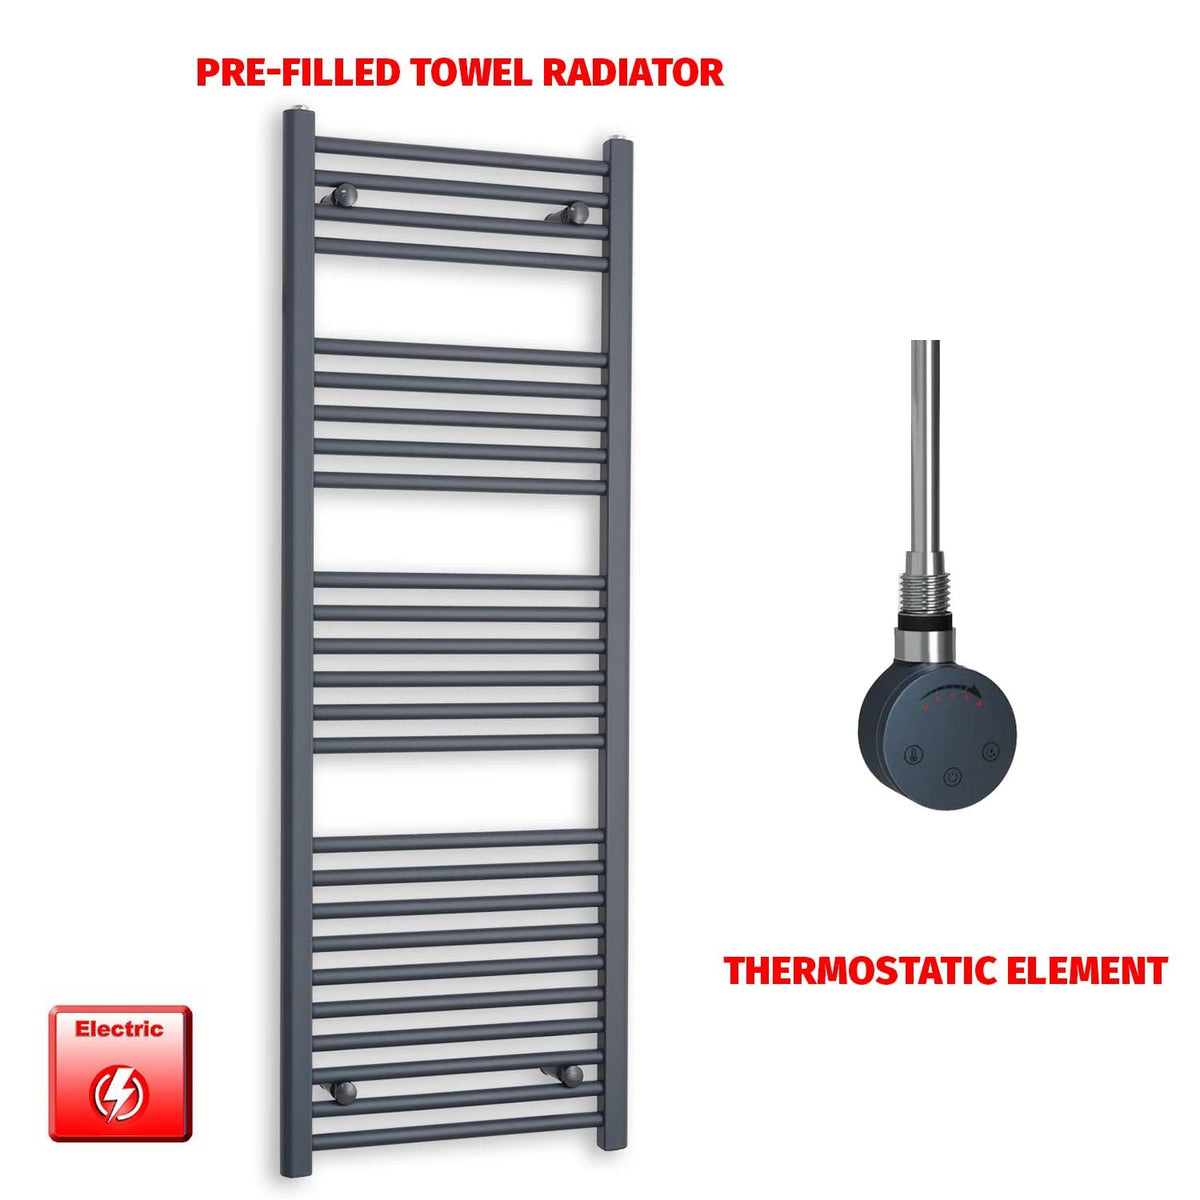 1400mm High 500mm Wide Flat Anthracite Pre-Filled Electric Heated Towel Rail Radiator HTR SMR Thermostatic element no timer